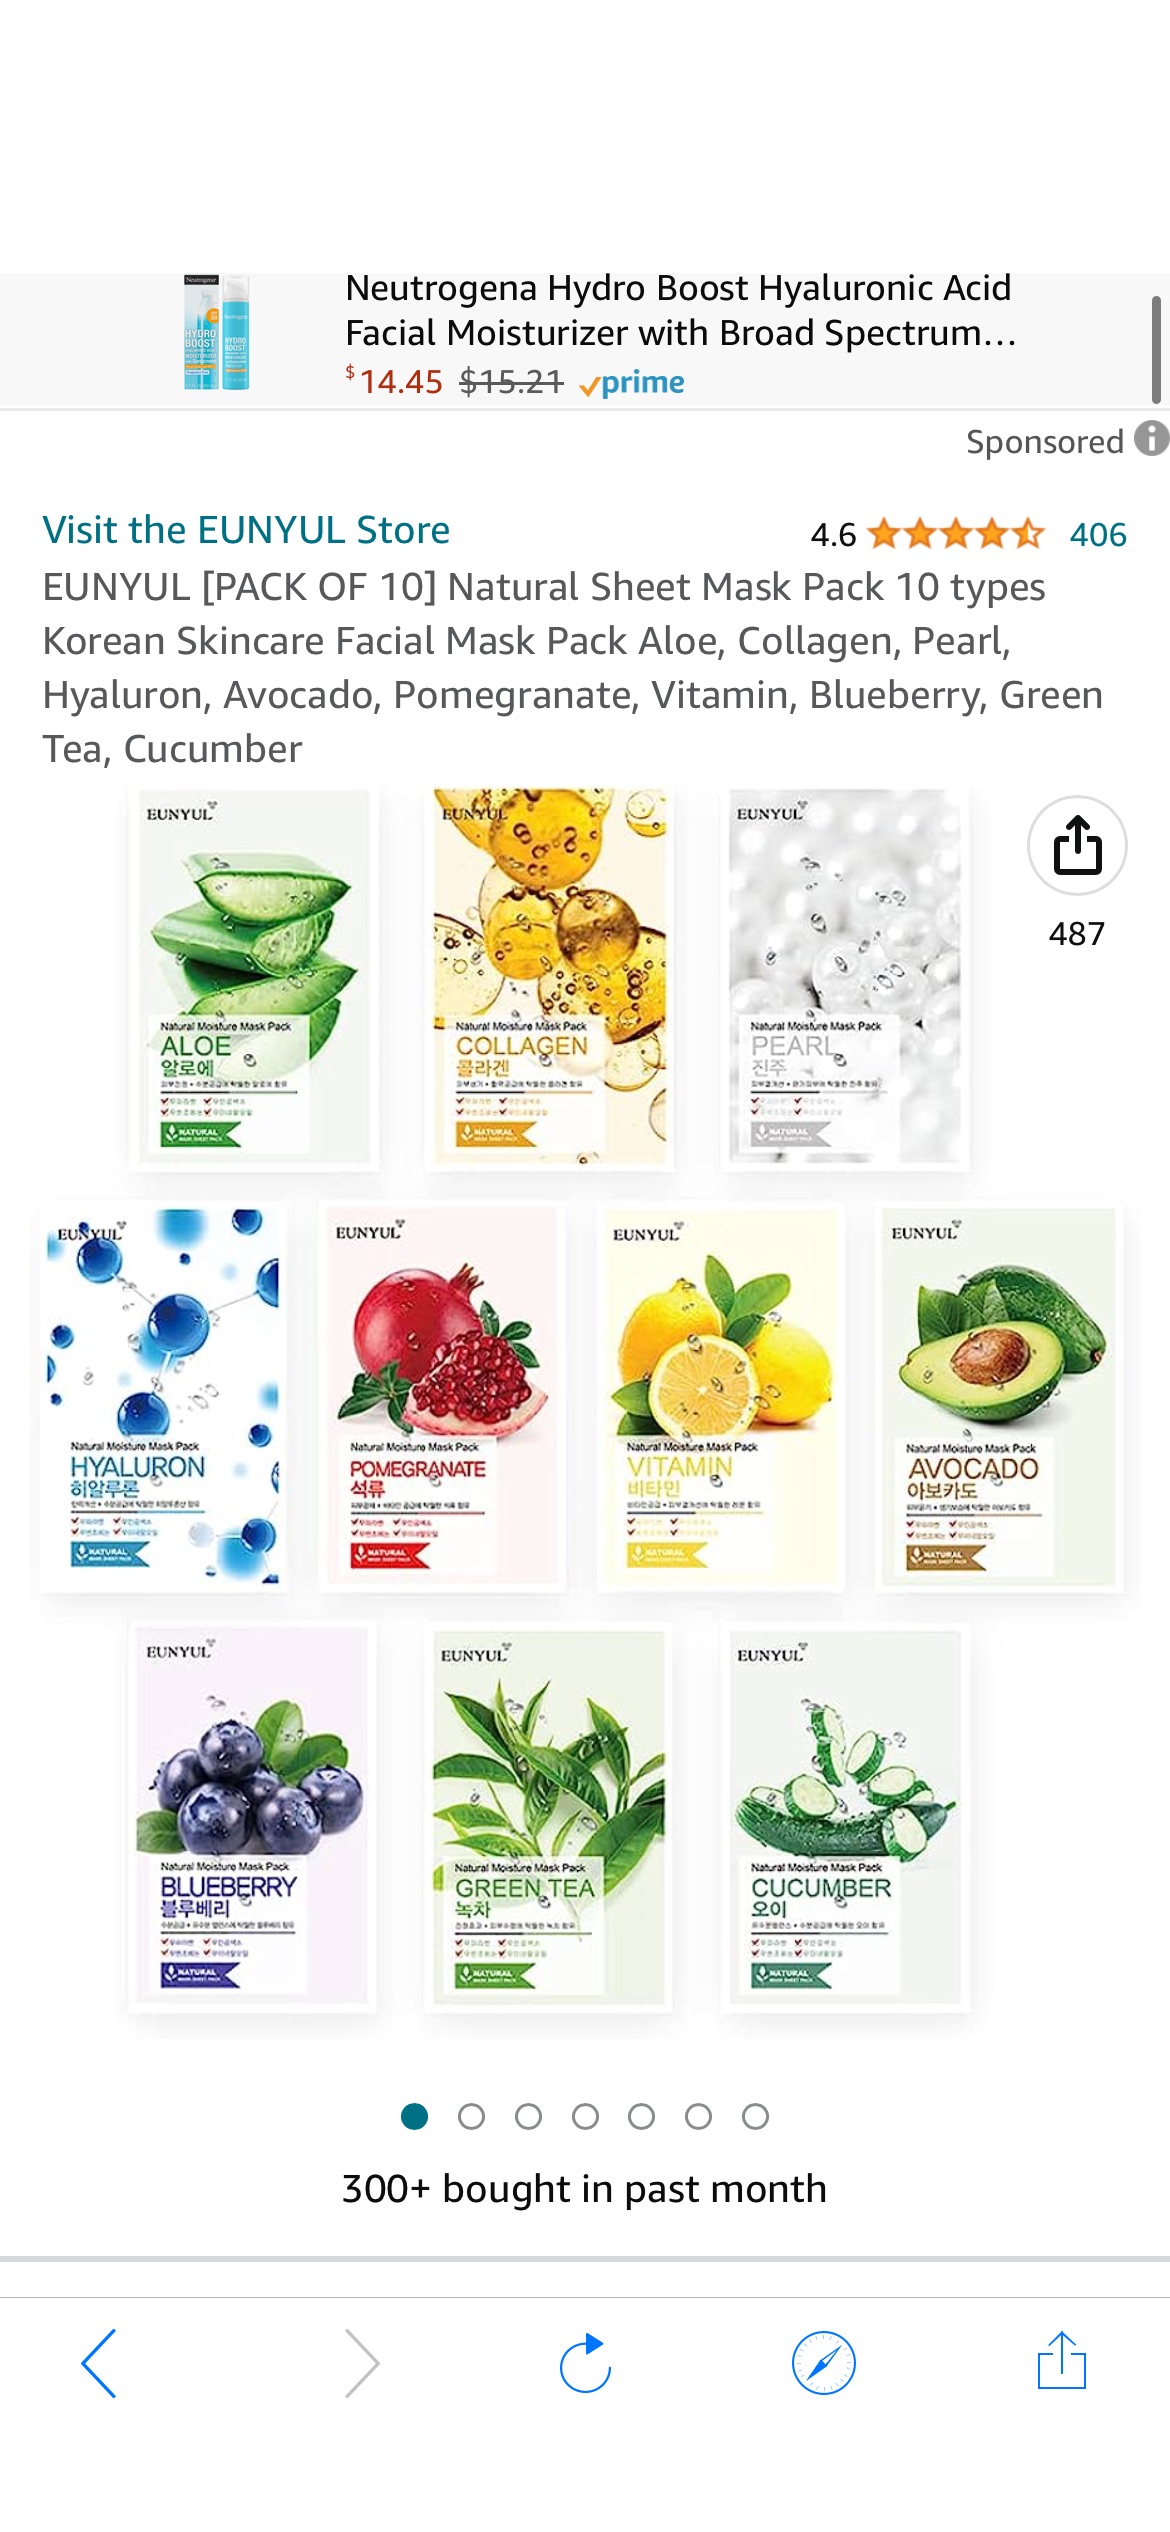 Amazon.com : EUNYUL [PACK OF 10] Natural Sheet Mask Pack 10 types Korean Skincare Facial Mask Pack Aloe, Collagen, Pearl, Hyaluron, Avocado, Pomegranate, Vitamin, Blueberry, Green Tea, Cucumber : Beauty & Personal Care